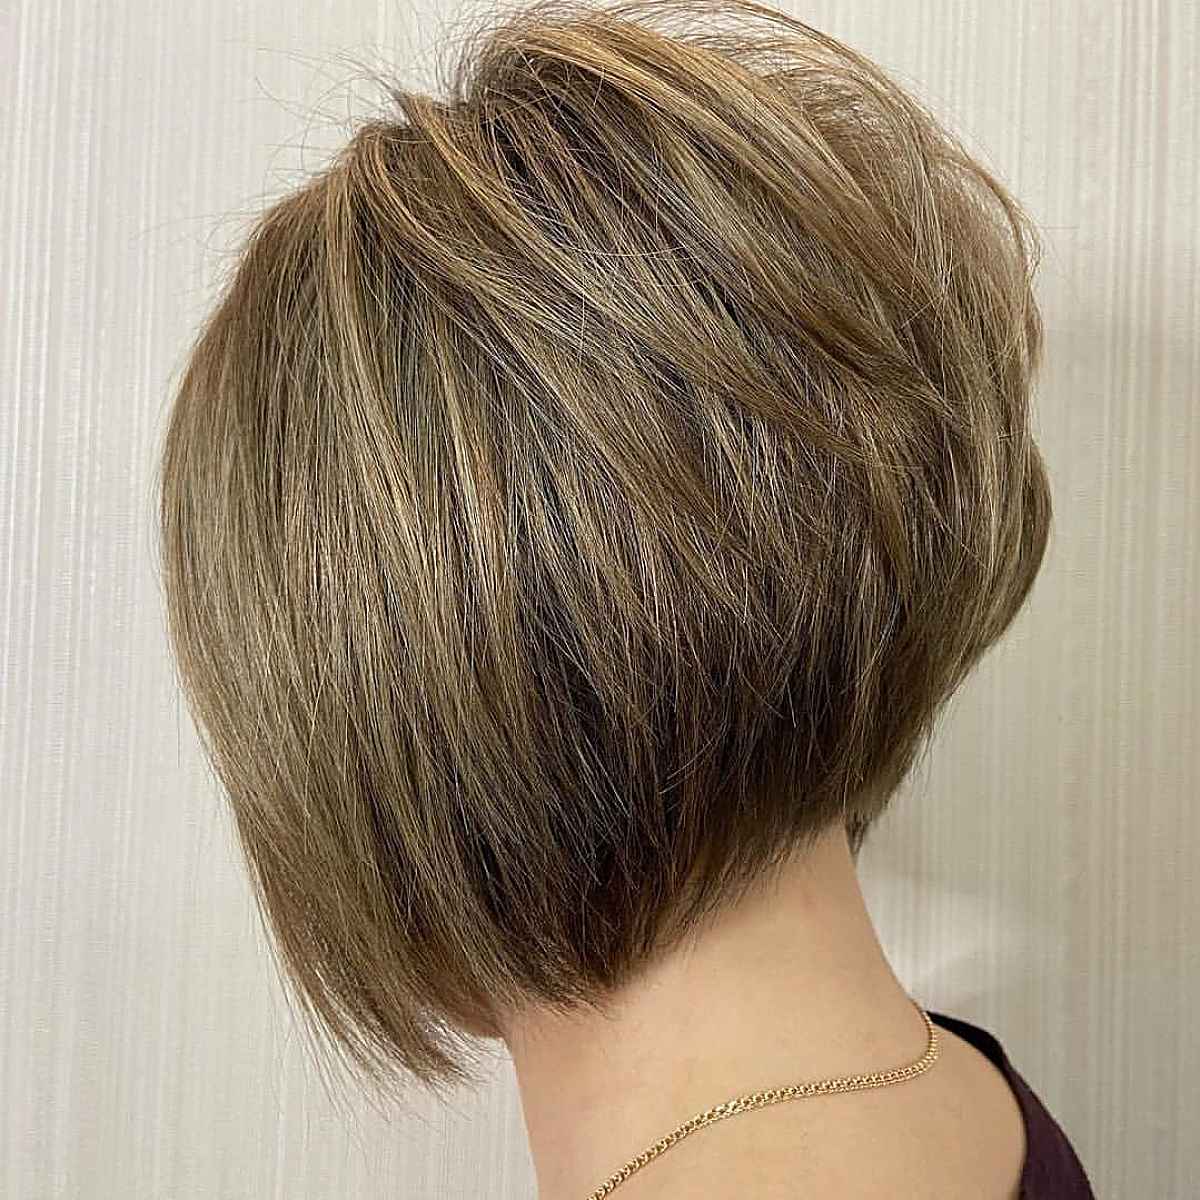 Short and Textured A-line Bob